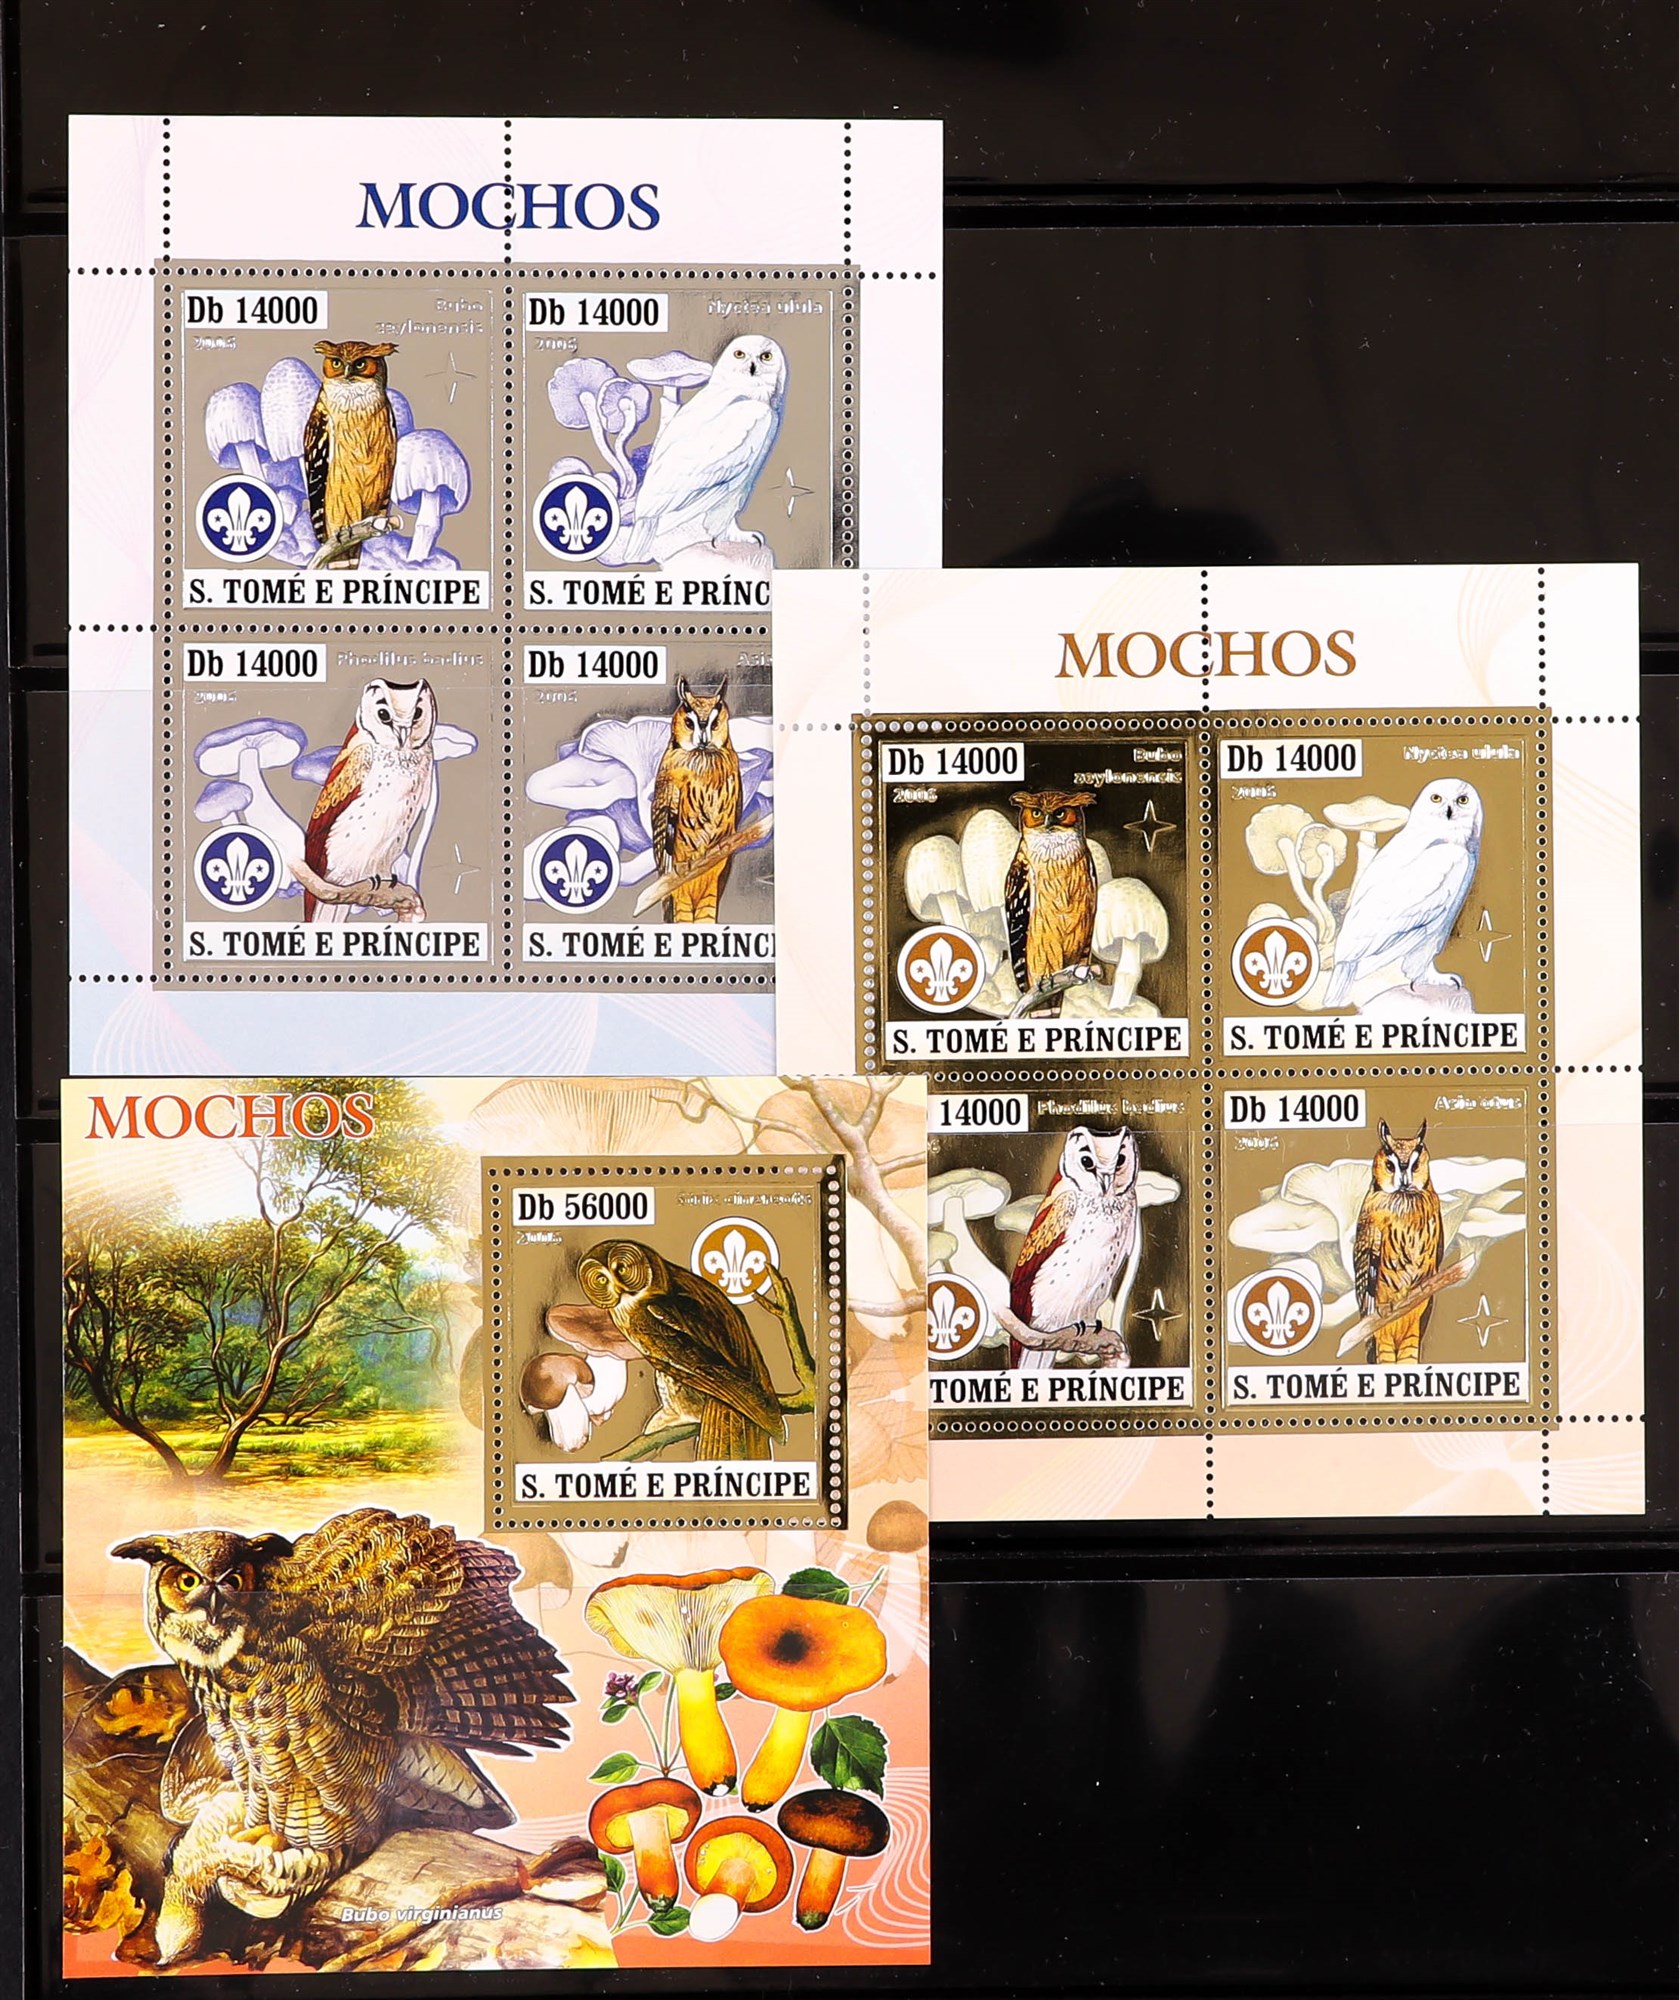 PORTUGUESE COLONIES FUNGI STAMPS OF ST THOMAS & PRINCE ISLANDS 1984 - 2014 never hinged mint - Image 27 of 30